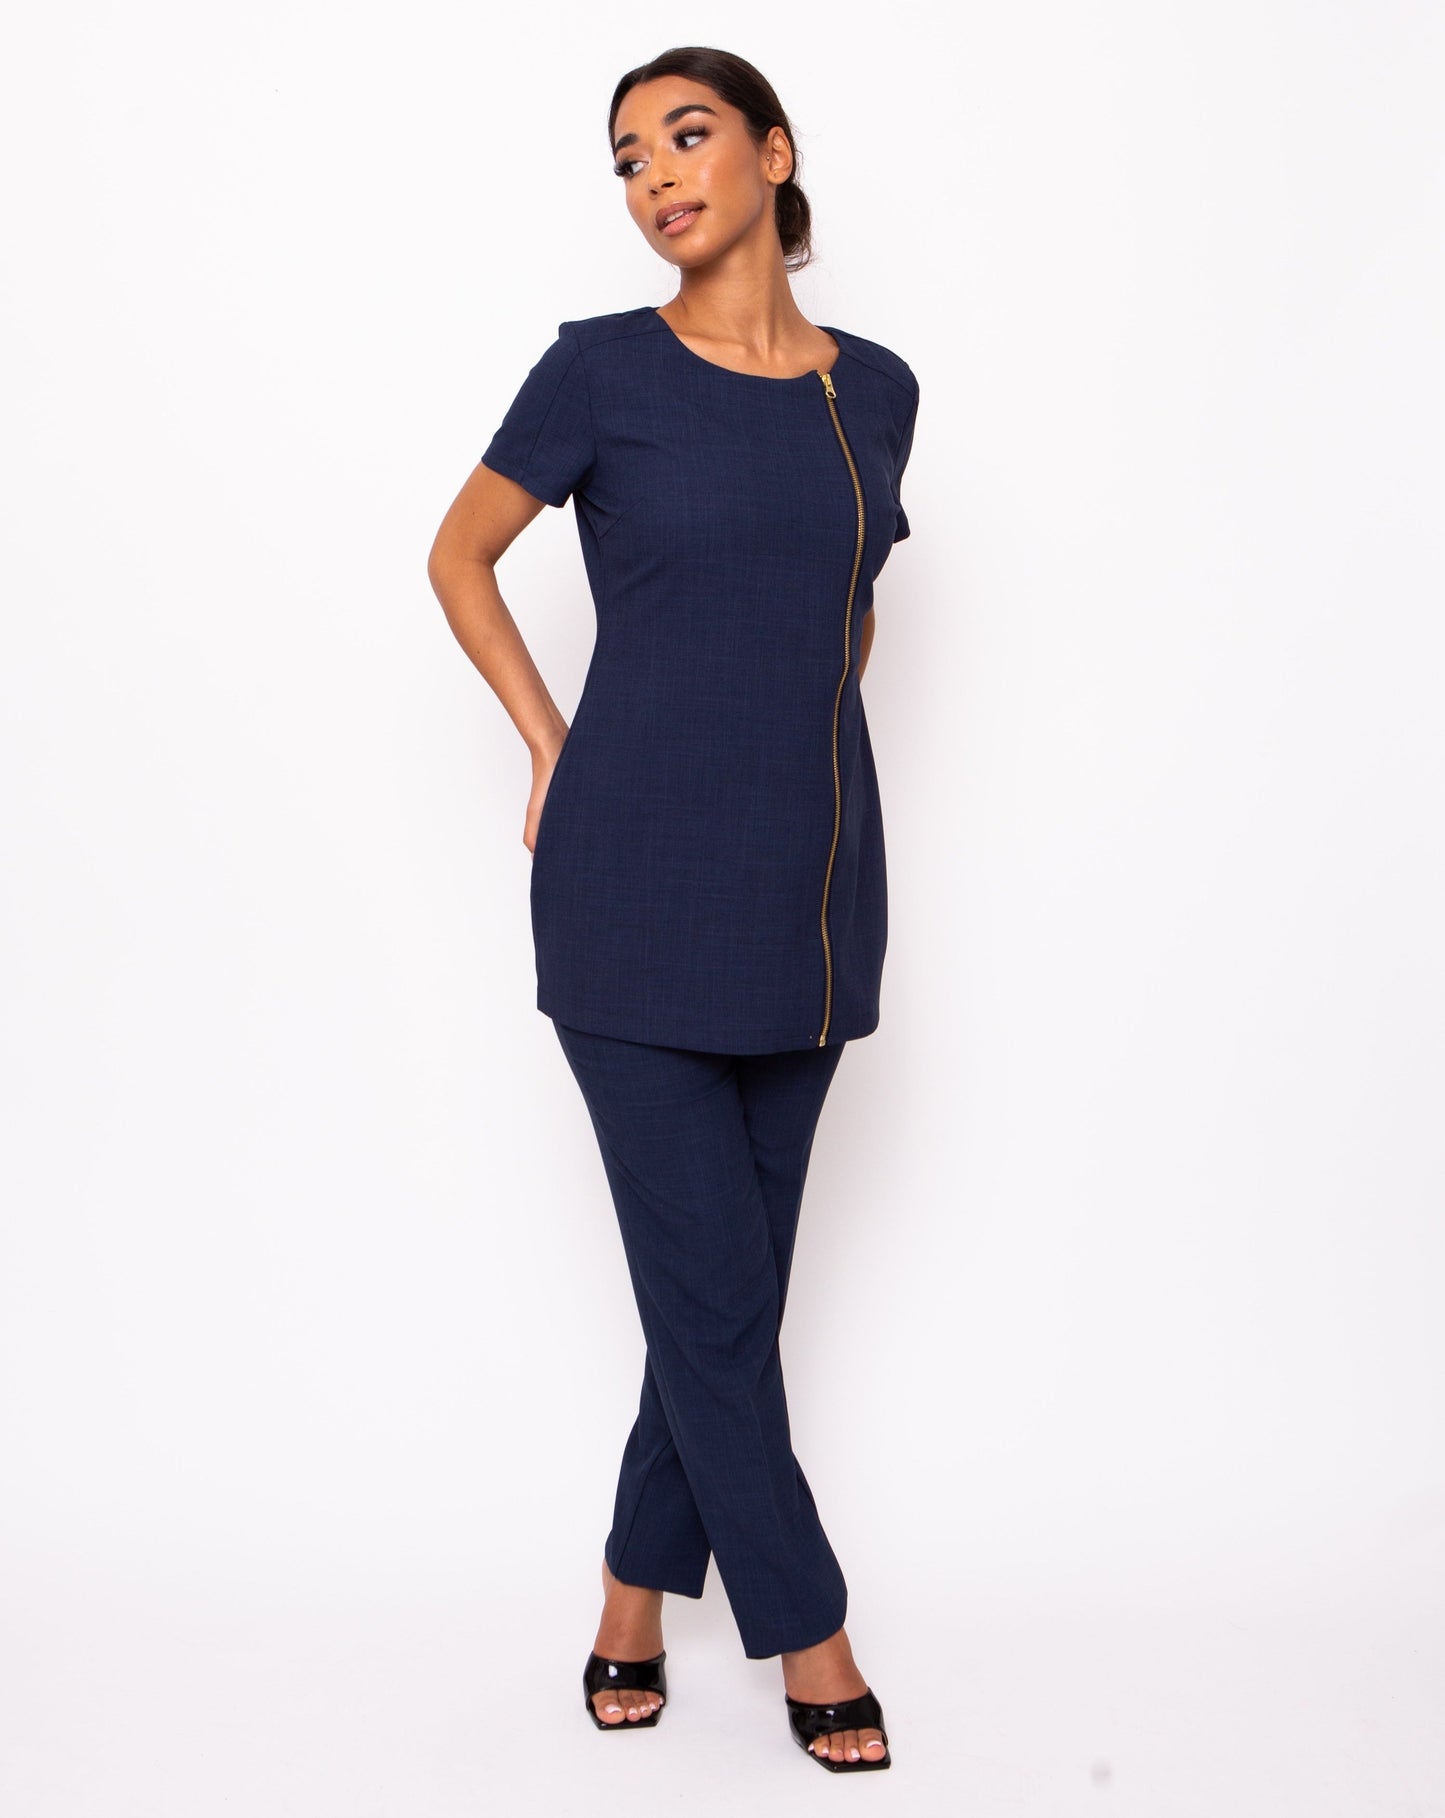 gold zip front navy blue tunic 